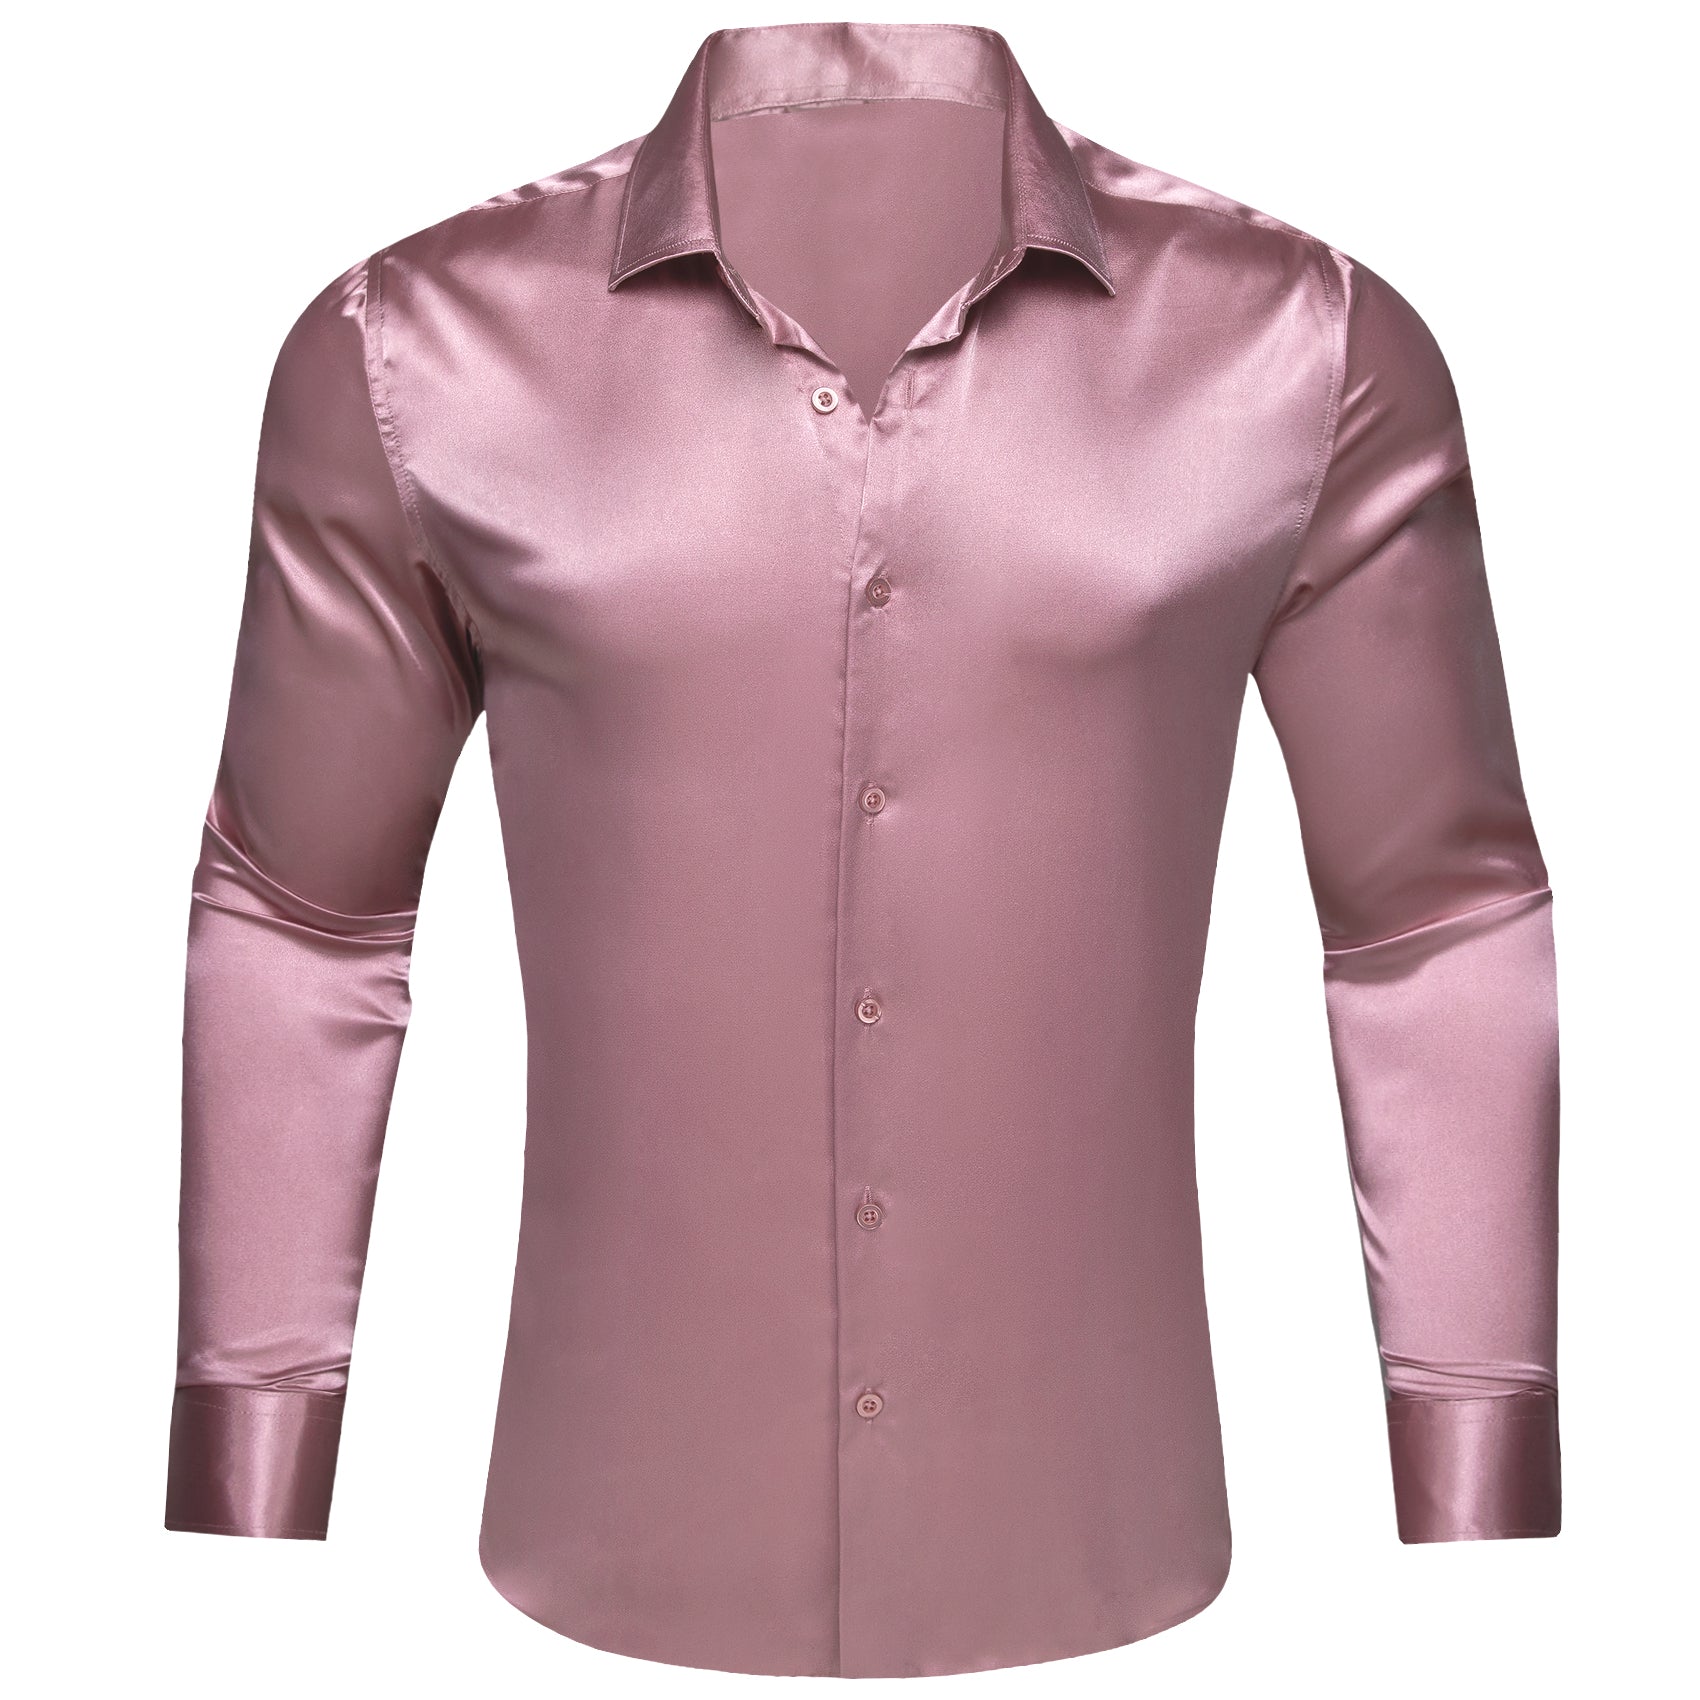 Barry.wang Pale Lavender Solid Silk Shirt